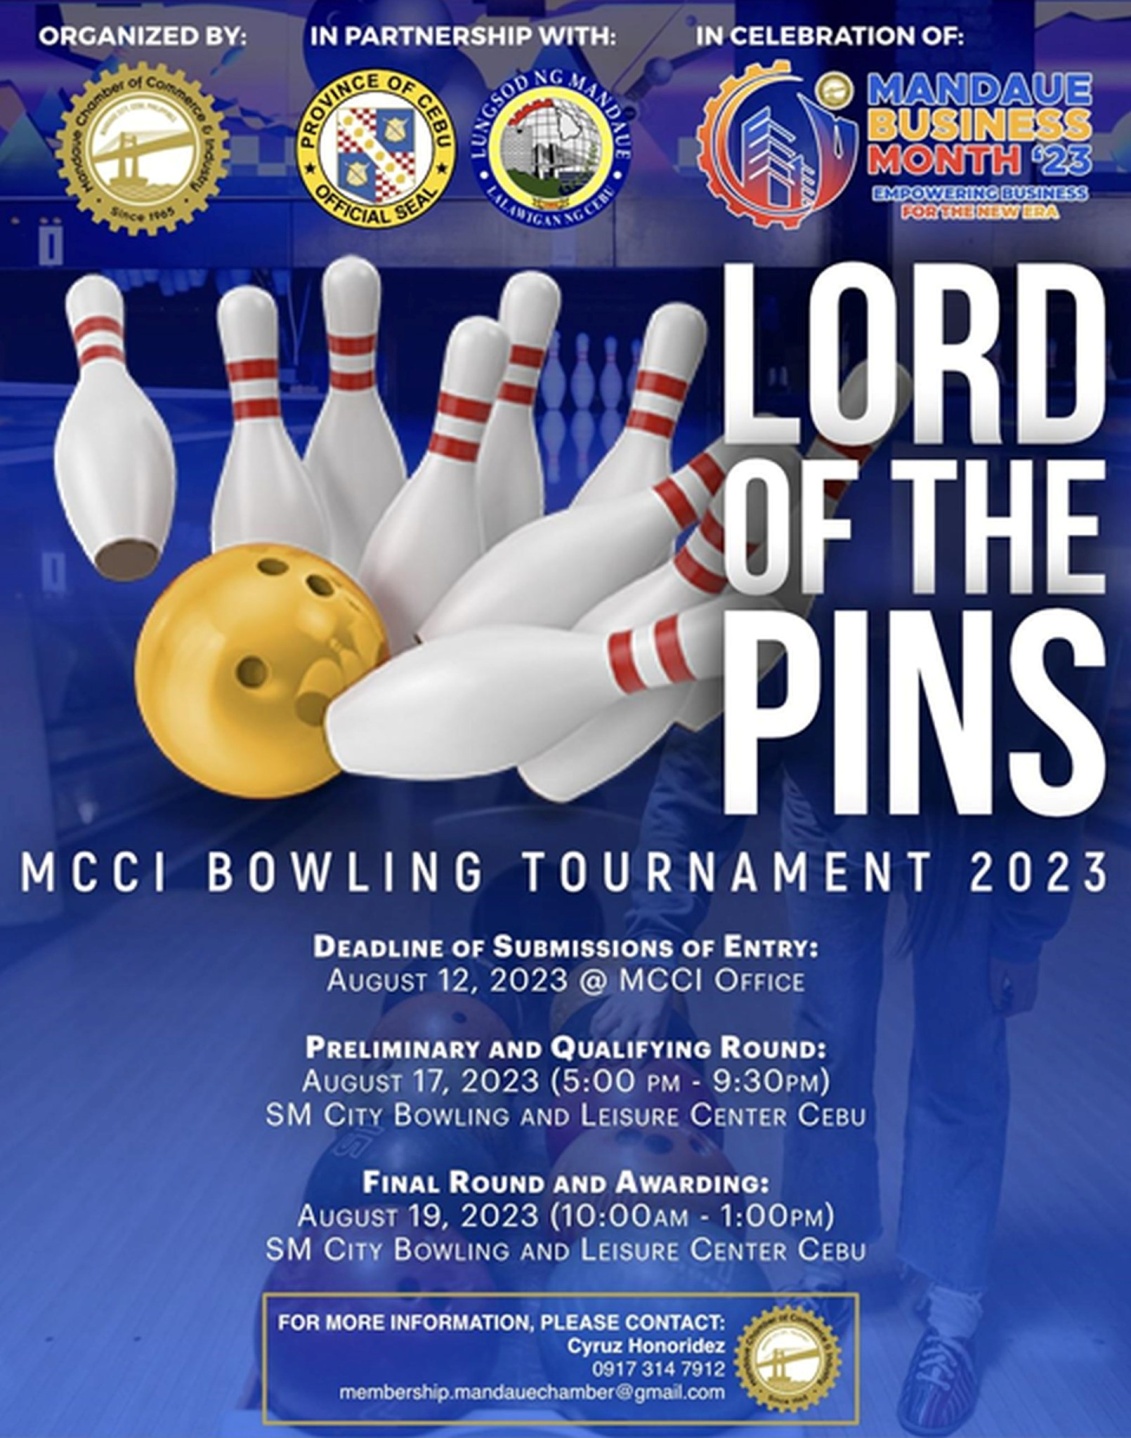 C:\Users\GCPI-ROBBY\Desktop\PRS\PR 2 - LORD OF THE PINS BOWLING TOURNAMENT\BOWLING POSTER 1.jpg